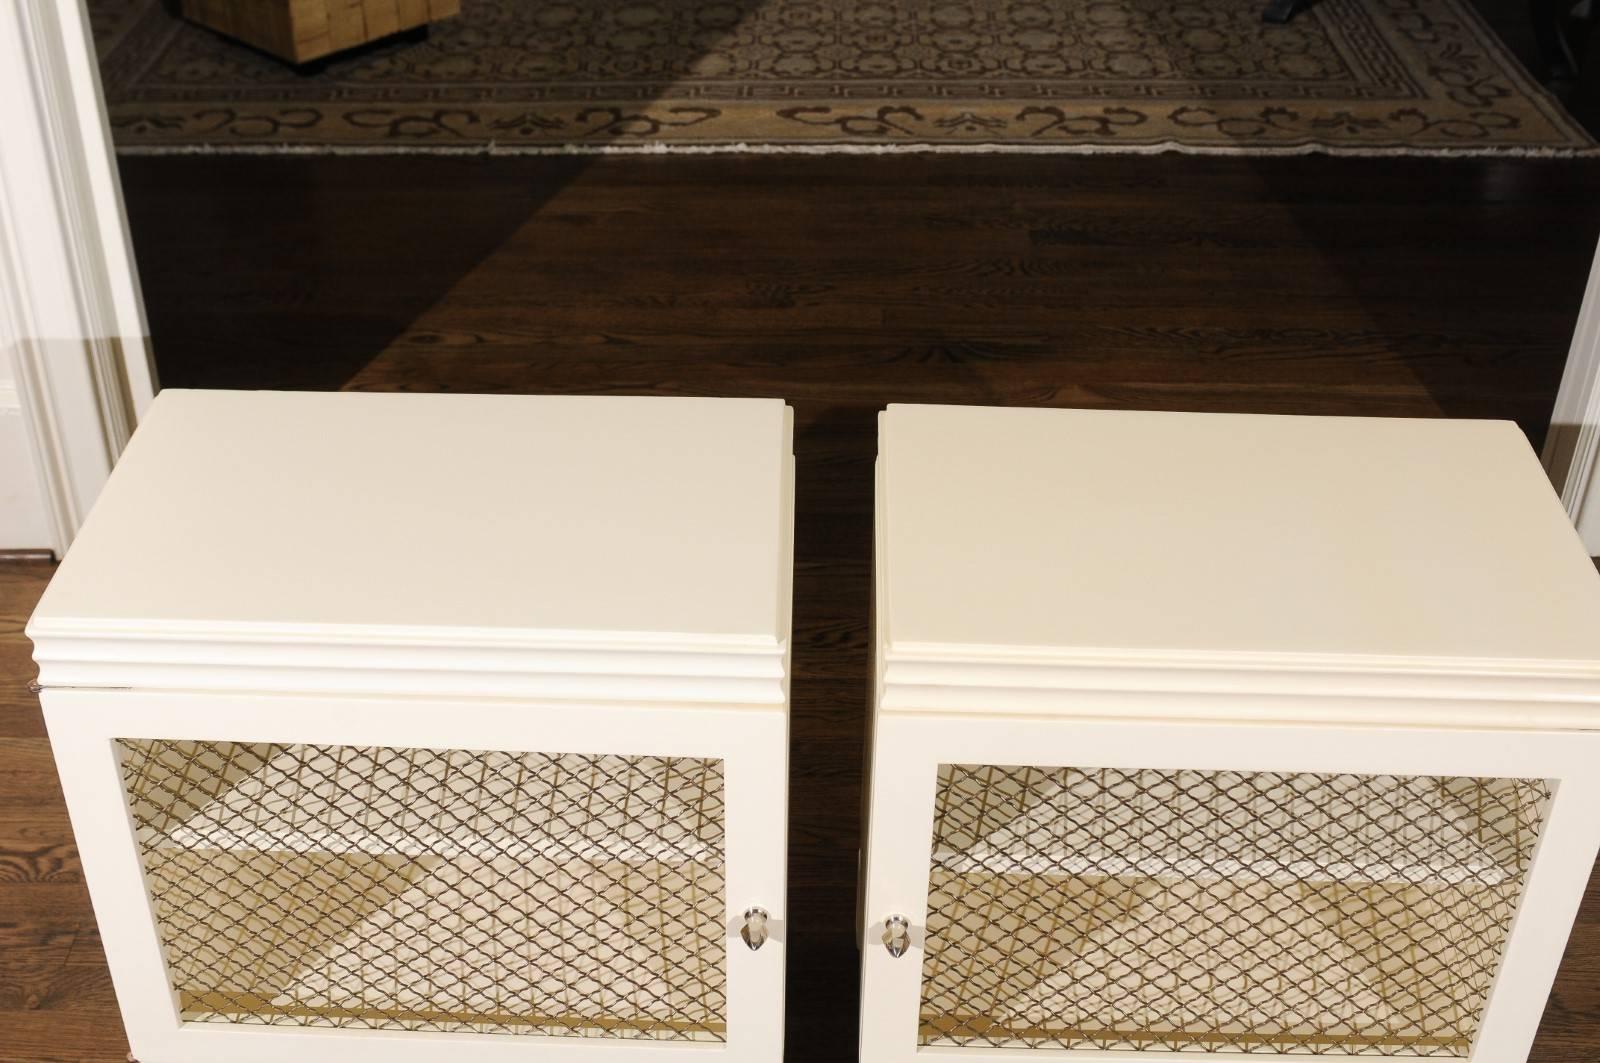 Gorgeous Restored Pair of End Tables by Widdicomb in Cream Lacquer, circa 1938 For Sale 4